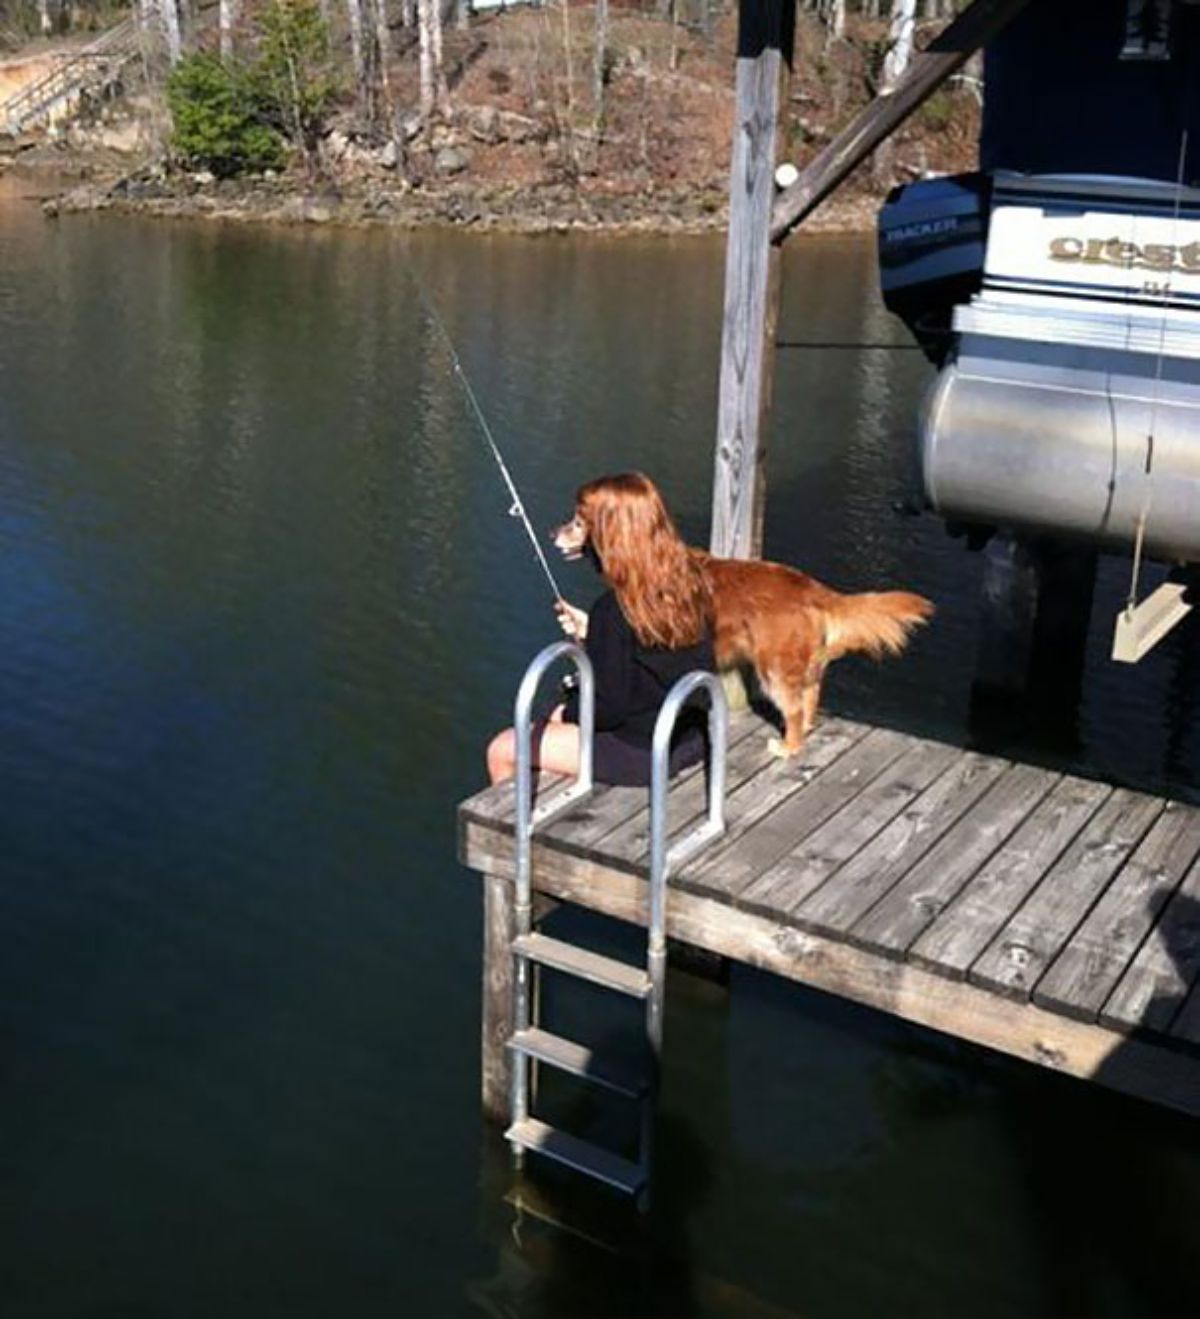 golden retriever standing next to a woman with red hair fishing looking like she has the dog's face